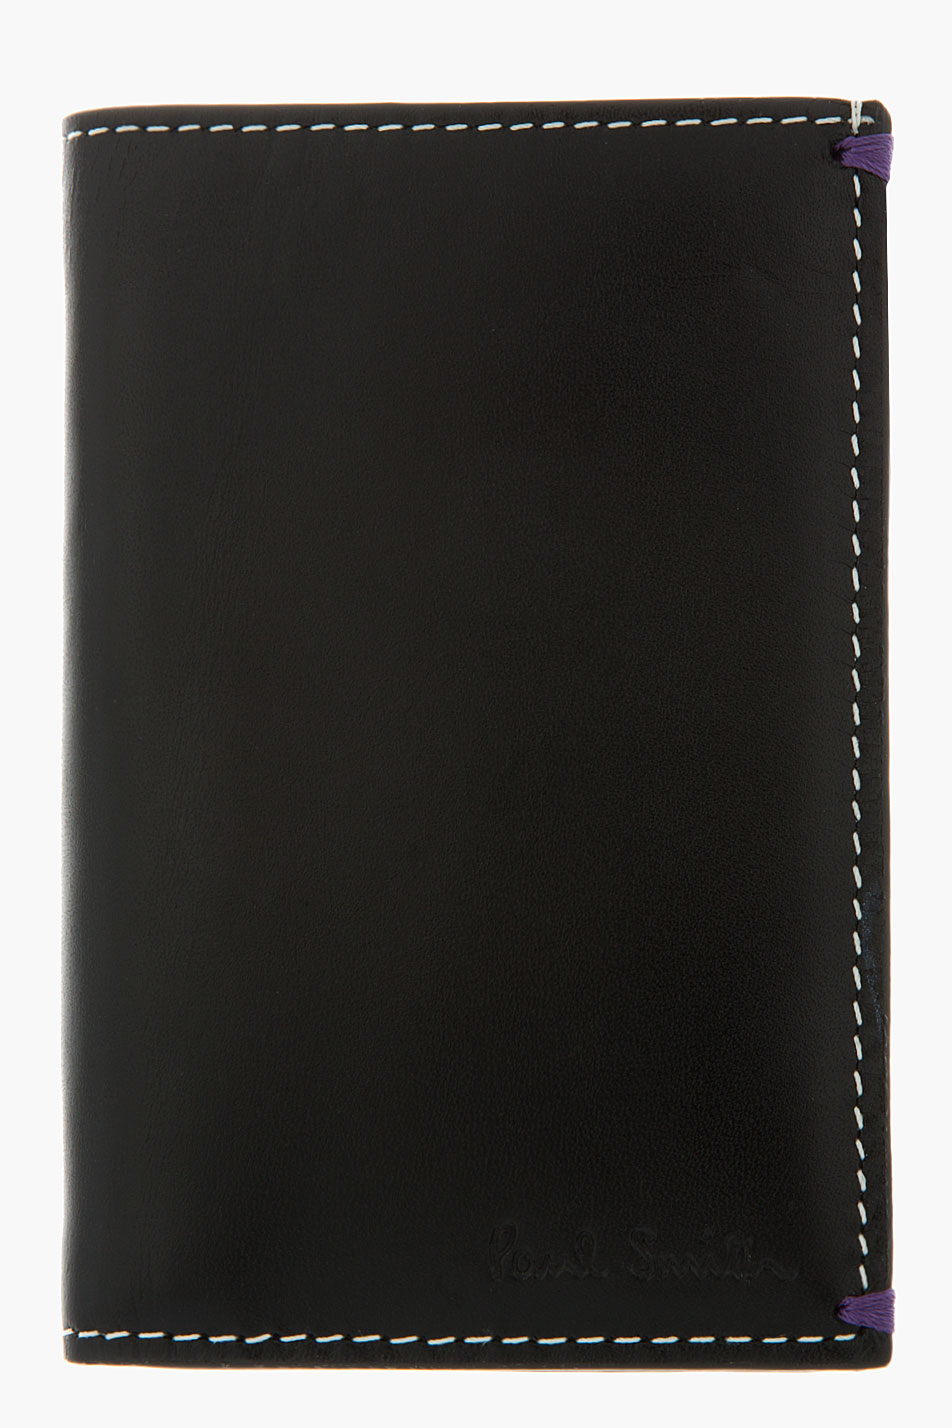 Paul Smith Black Polished Leather Taxi Driver Print Vertical Wallet in Black for Men | Lyst